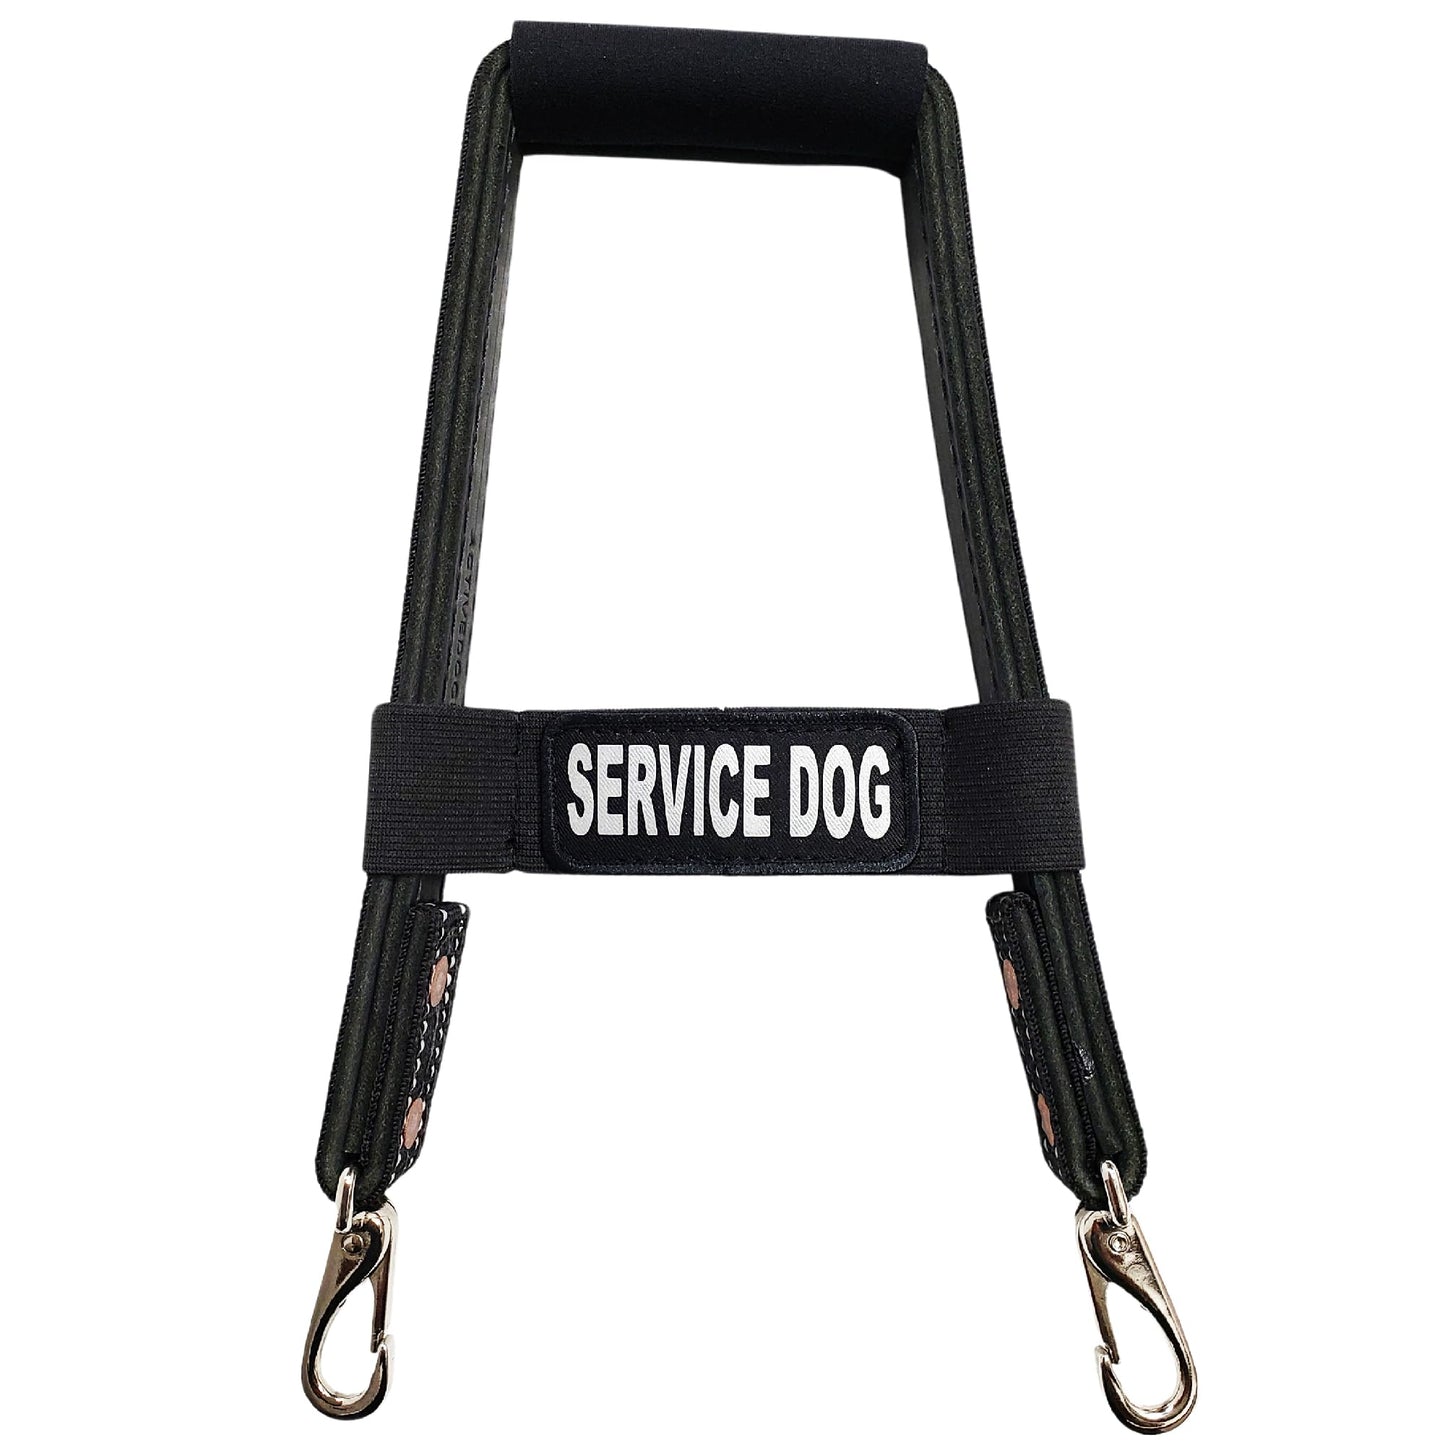 ActiveDogs Leather Bridge Handle for Service Dog 16" - Solid Steel & Leather Service Dog Handle with Easy Snap-On Clips, Reflective Service Dog ID Band & Neoprene Padded Handle